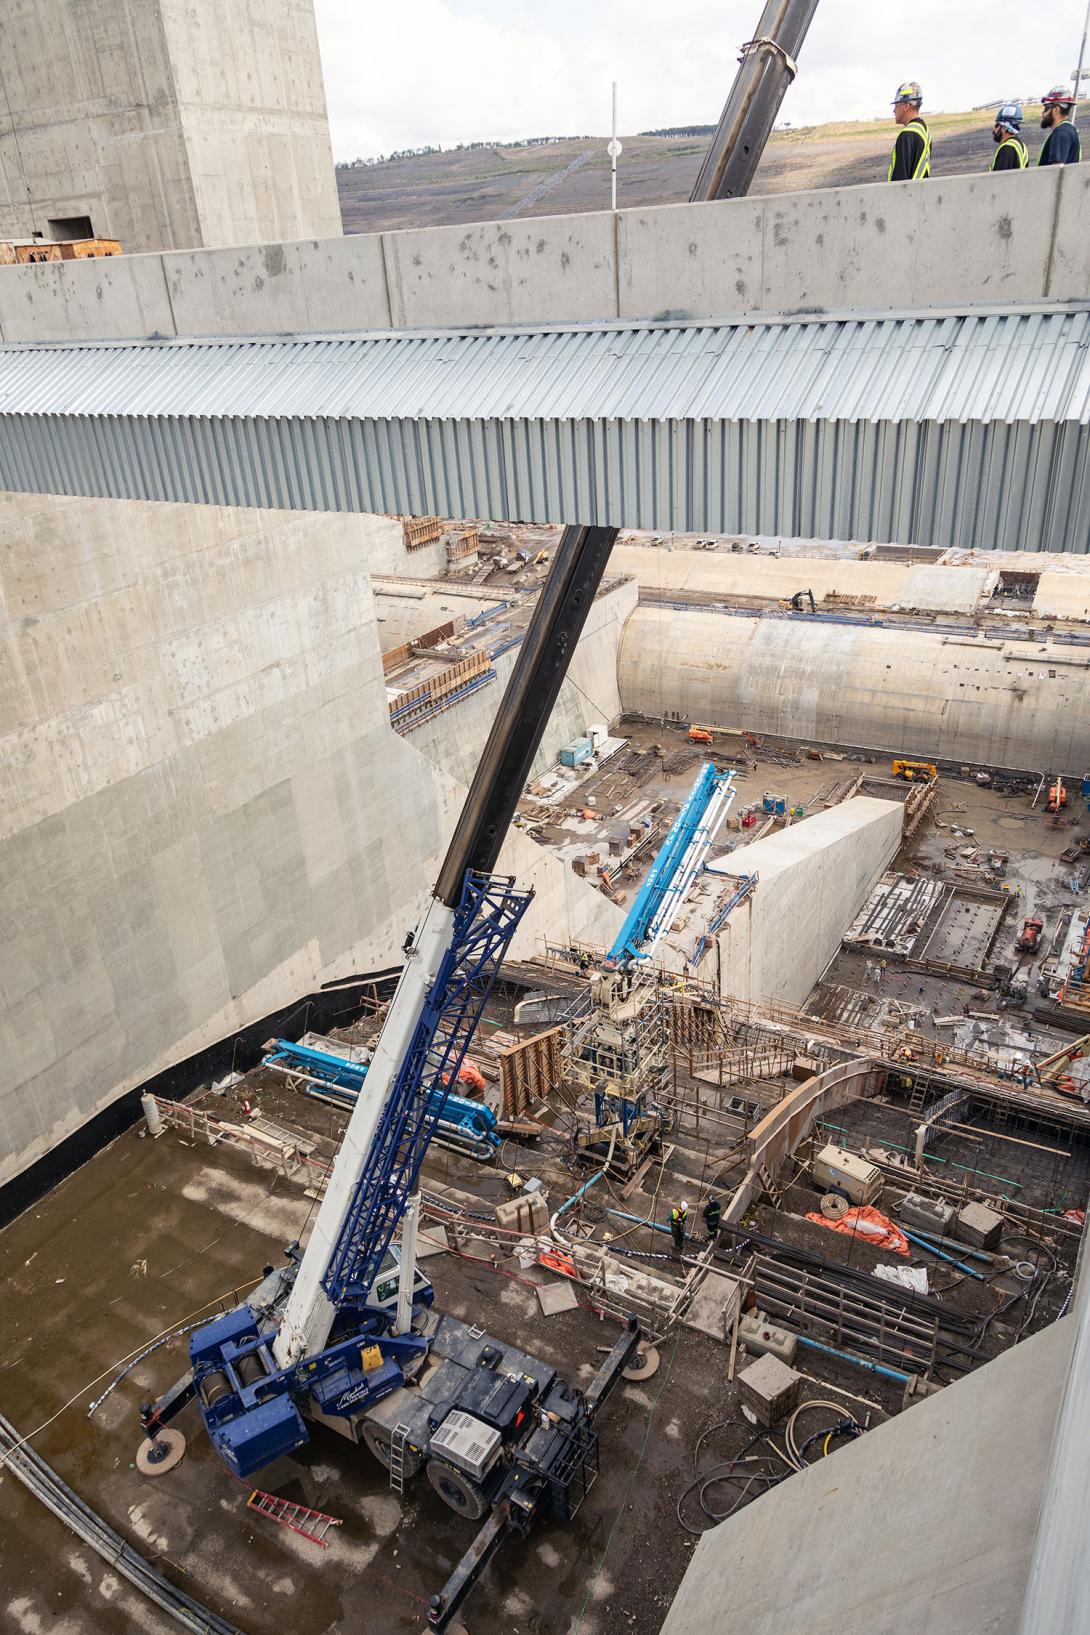 Formwork and reinforcing steel are installed on the auxiliary spillway chute to pour concrete.